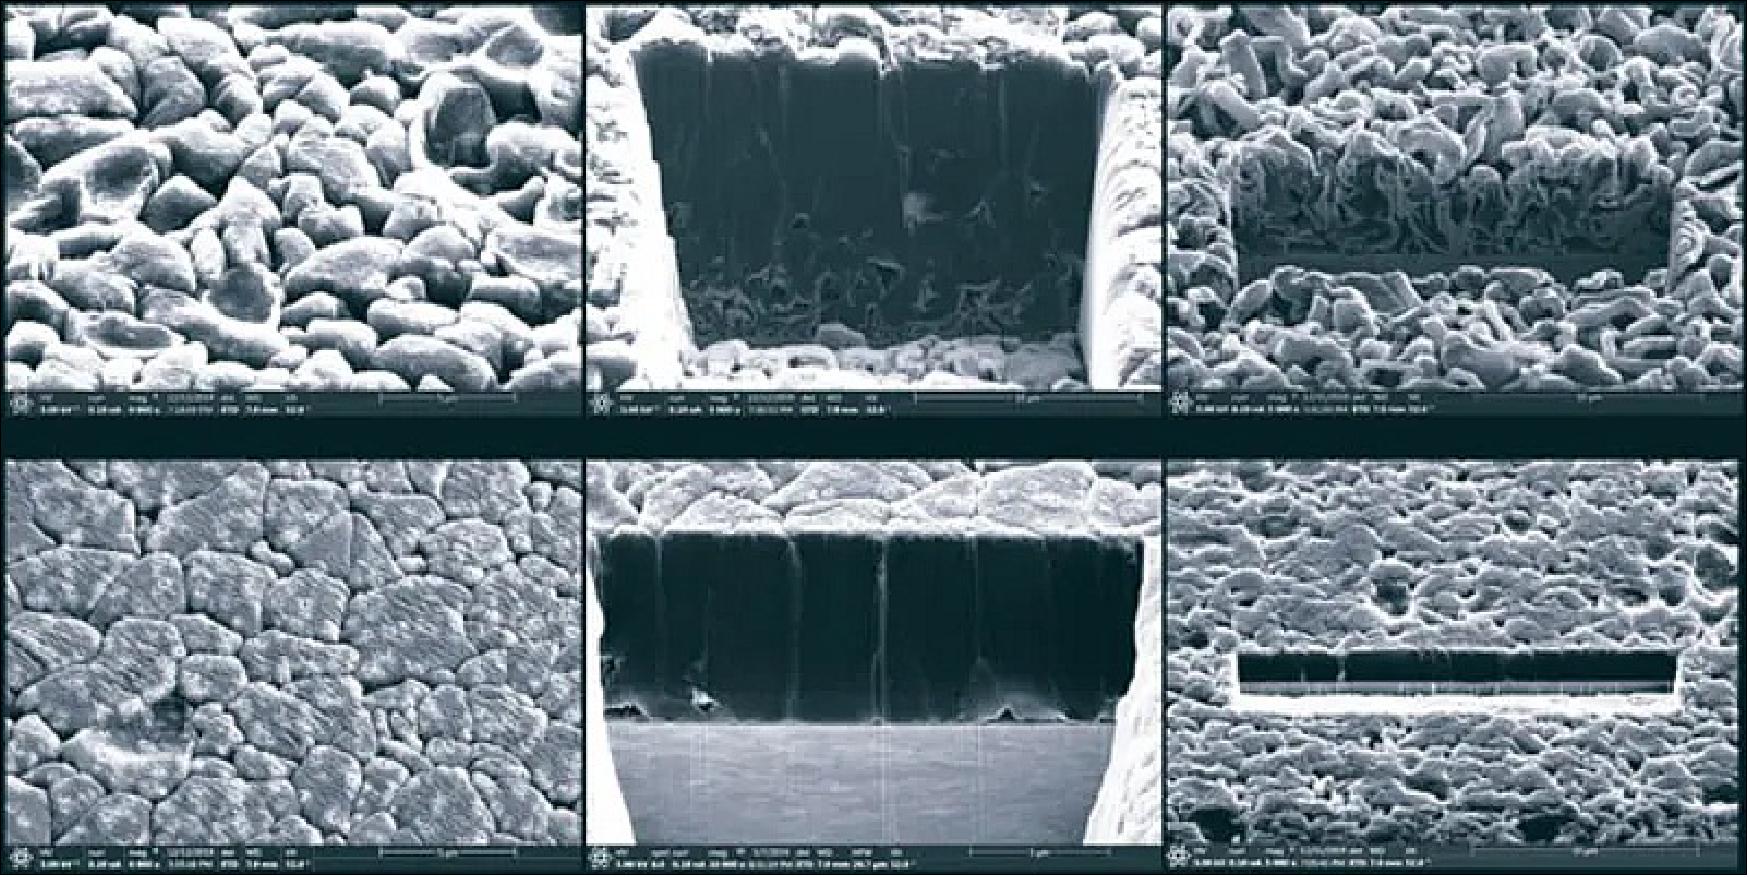 Figure 5: Top row: top view and cross sections of deposited lithium at 70 kPa. Bottom row: top view and cross sections of deposited lithium at 350 kPa. The higher pressure causes the lithium particles to deposit in neatly stacked columns, which increases the volume of lithium deposited and prevents porosity (image credit: UCSD)